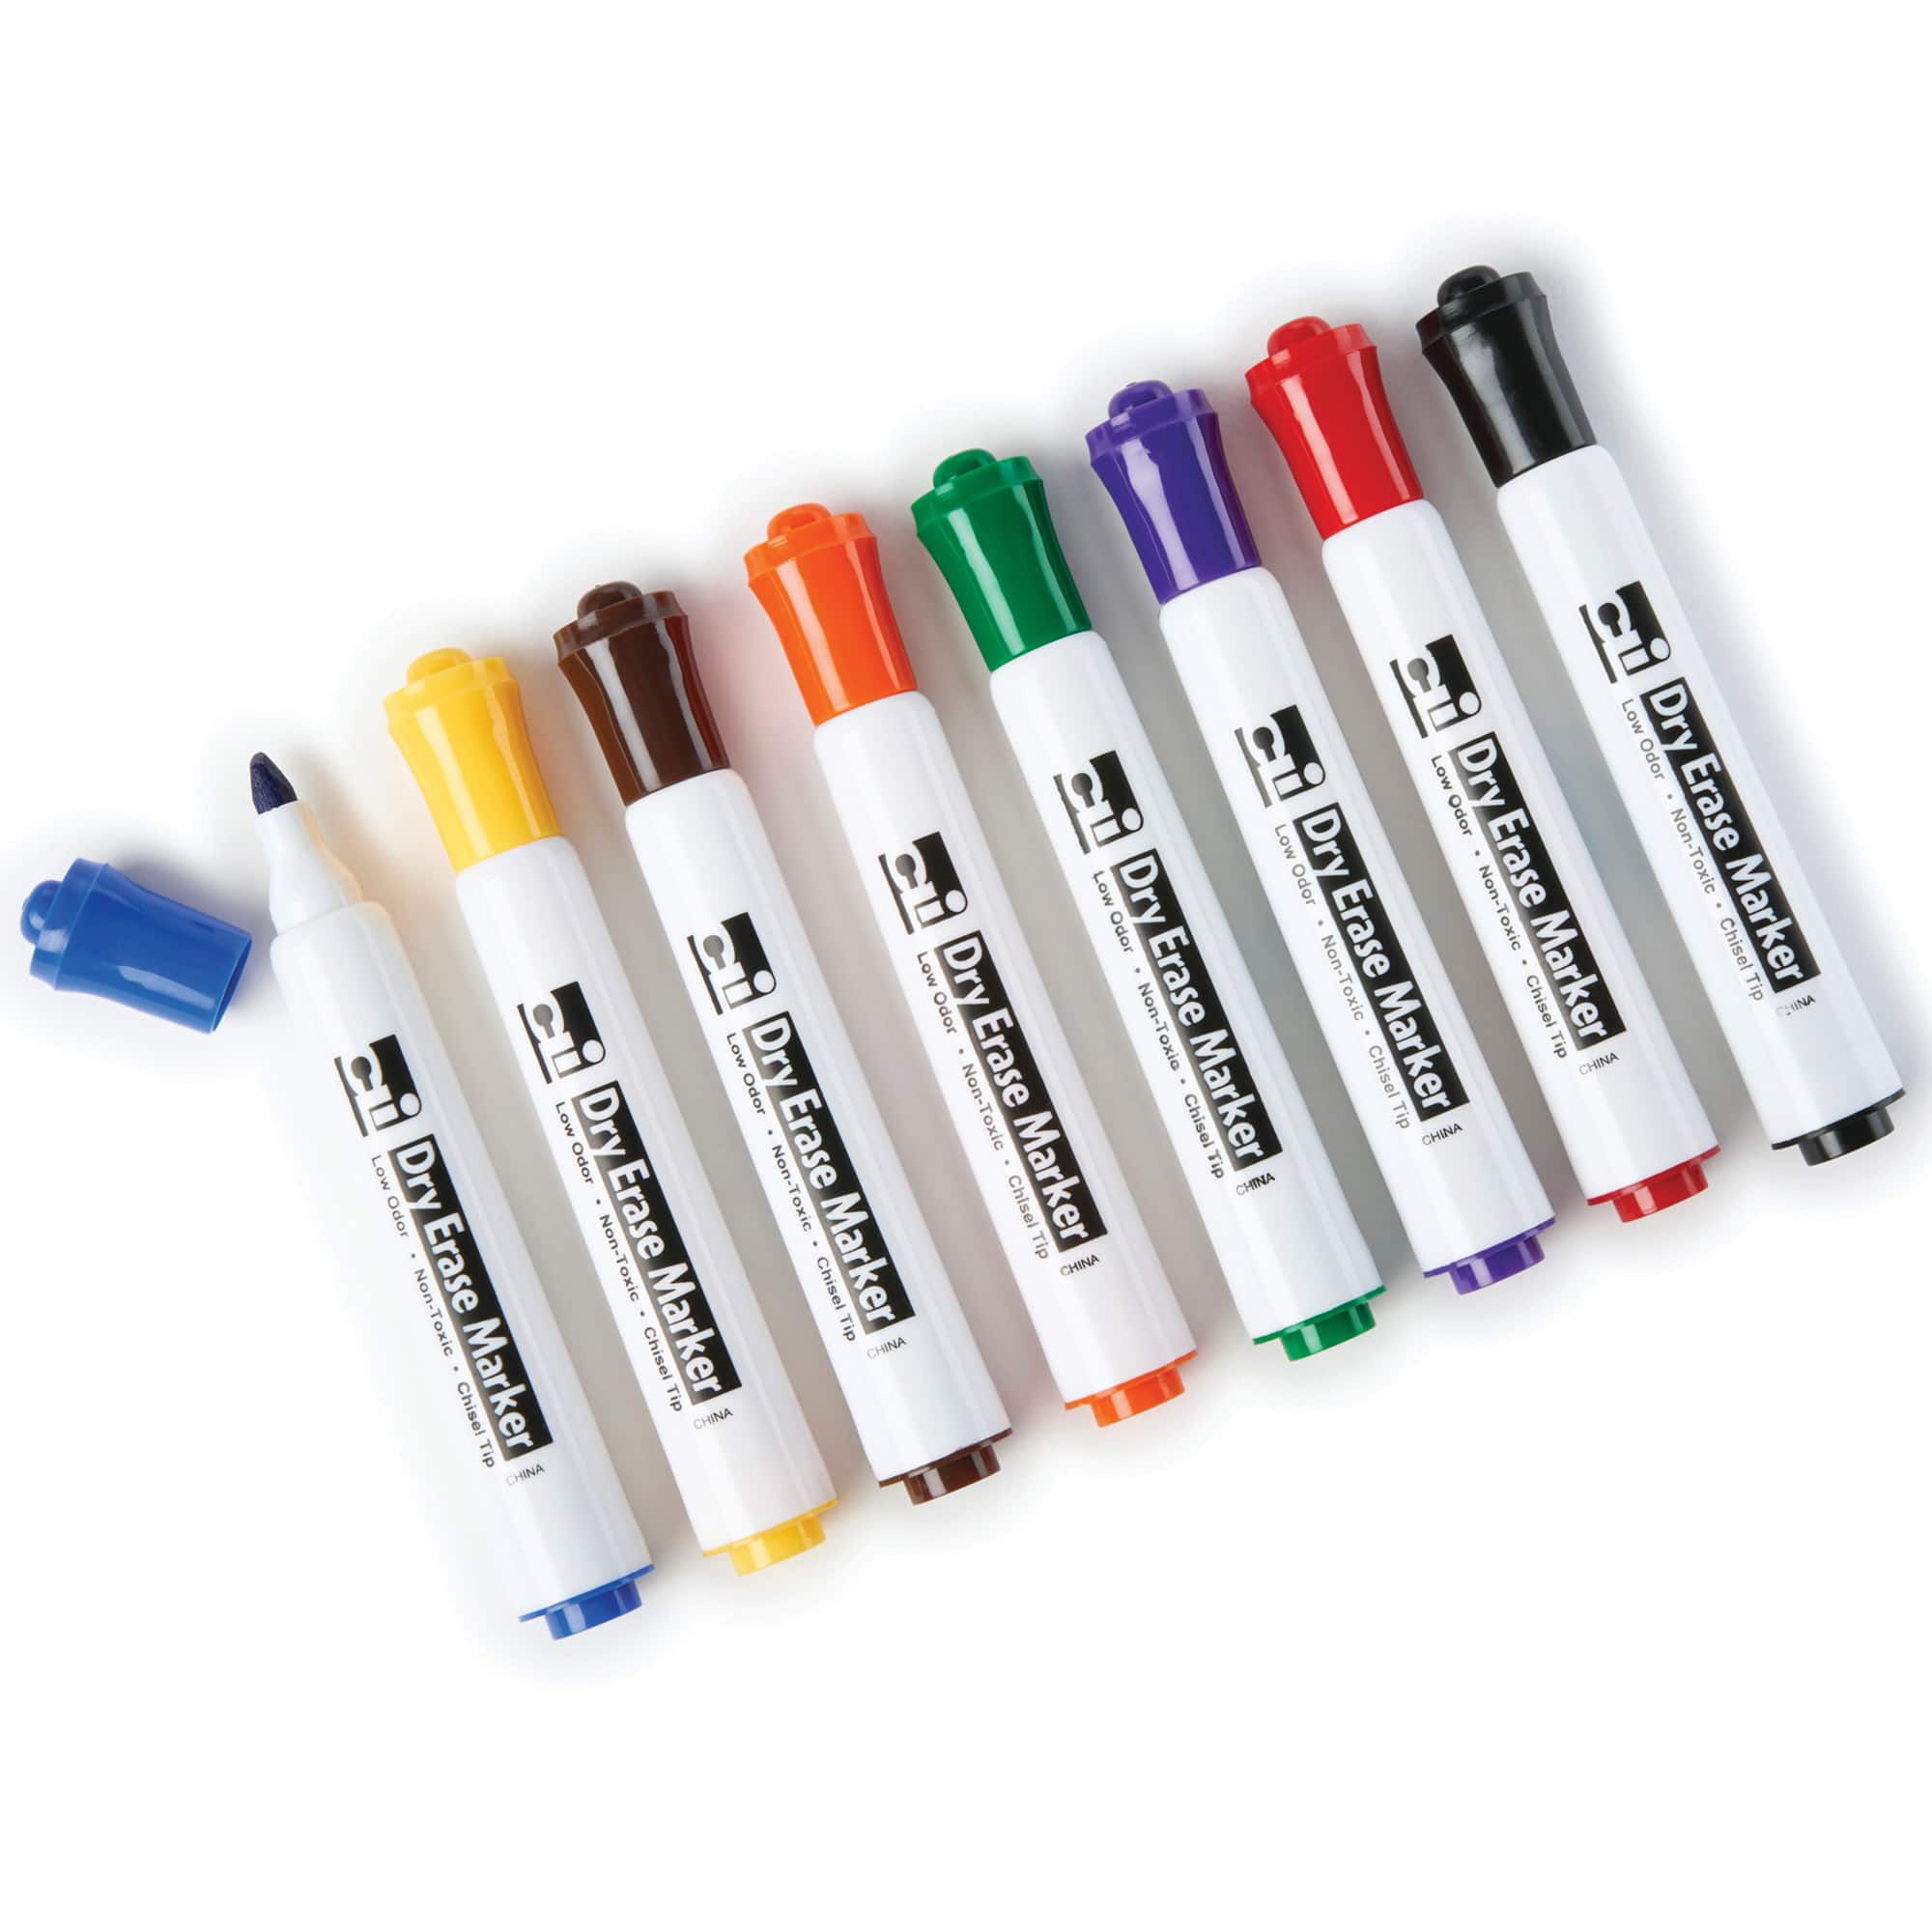 8 Assorted Colors Chisel Tip Barrel Style Dry Erase Markers, 4 Packs